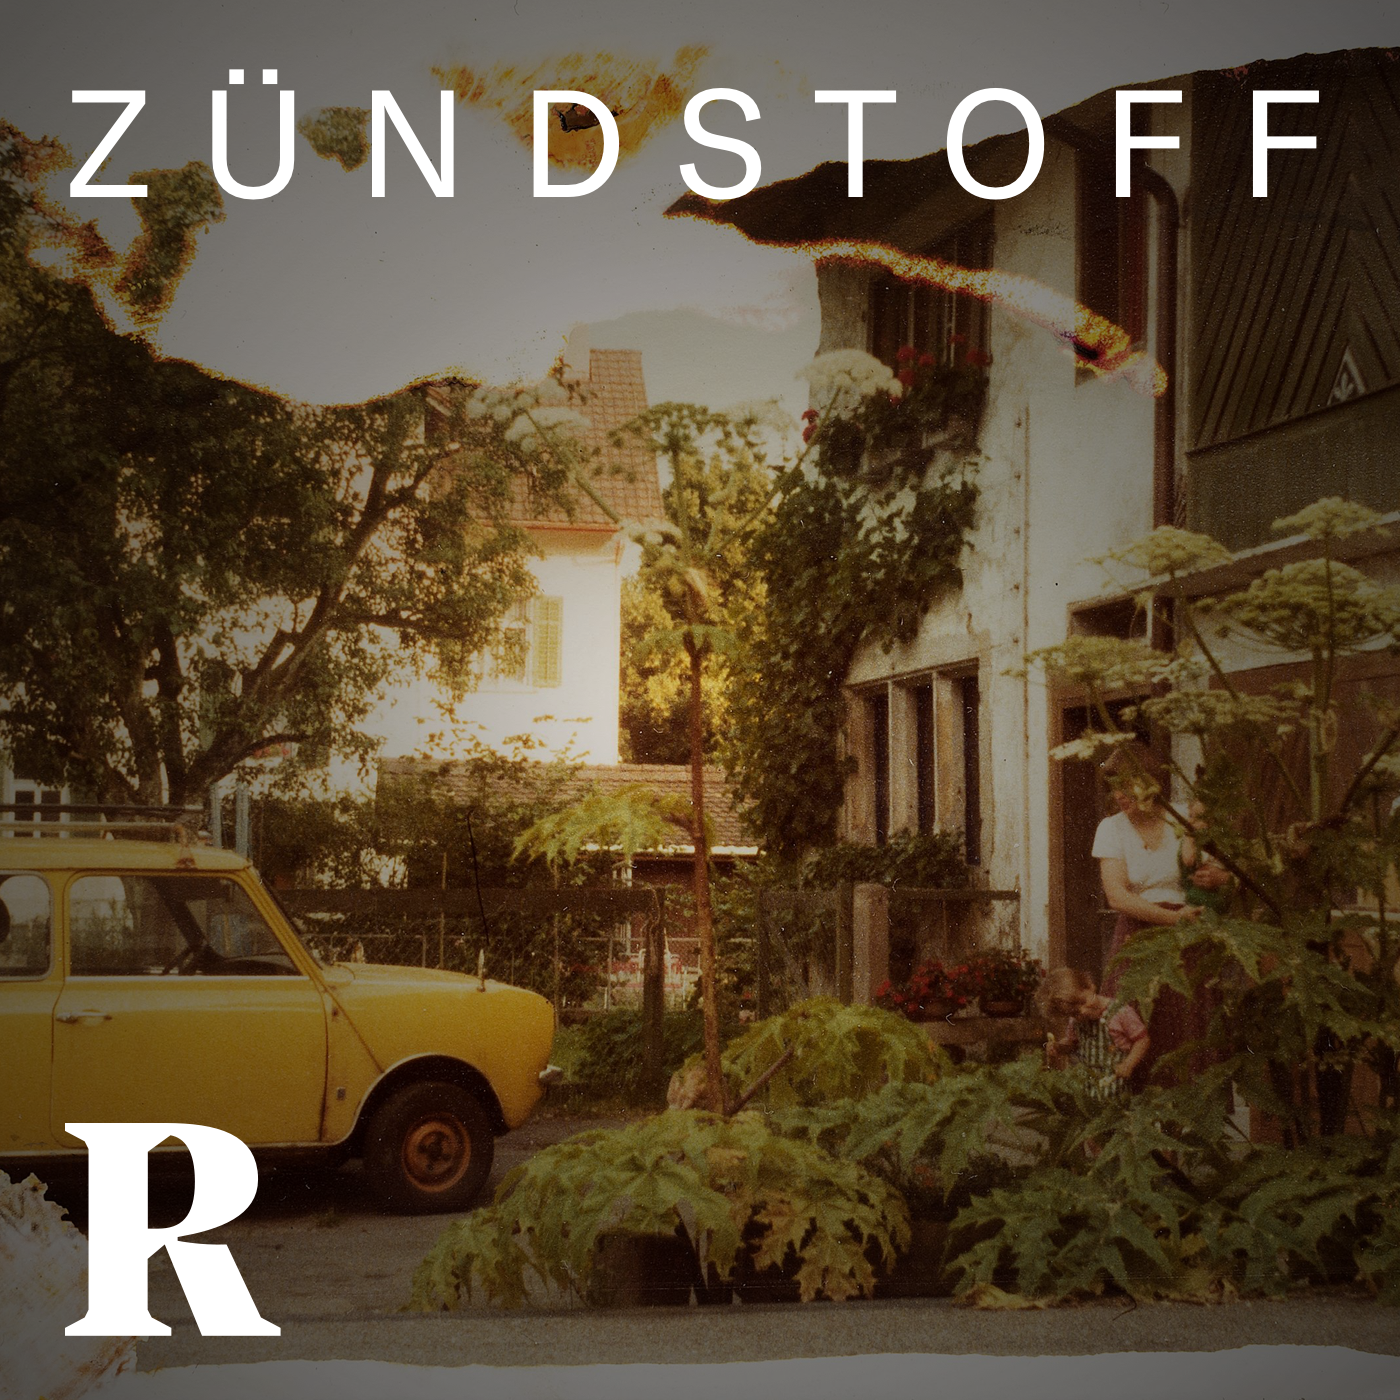 Zuendstoff_Cover_0.png